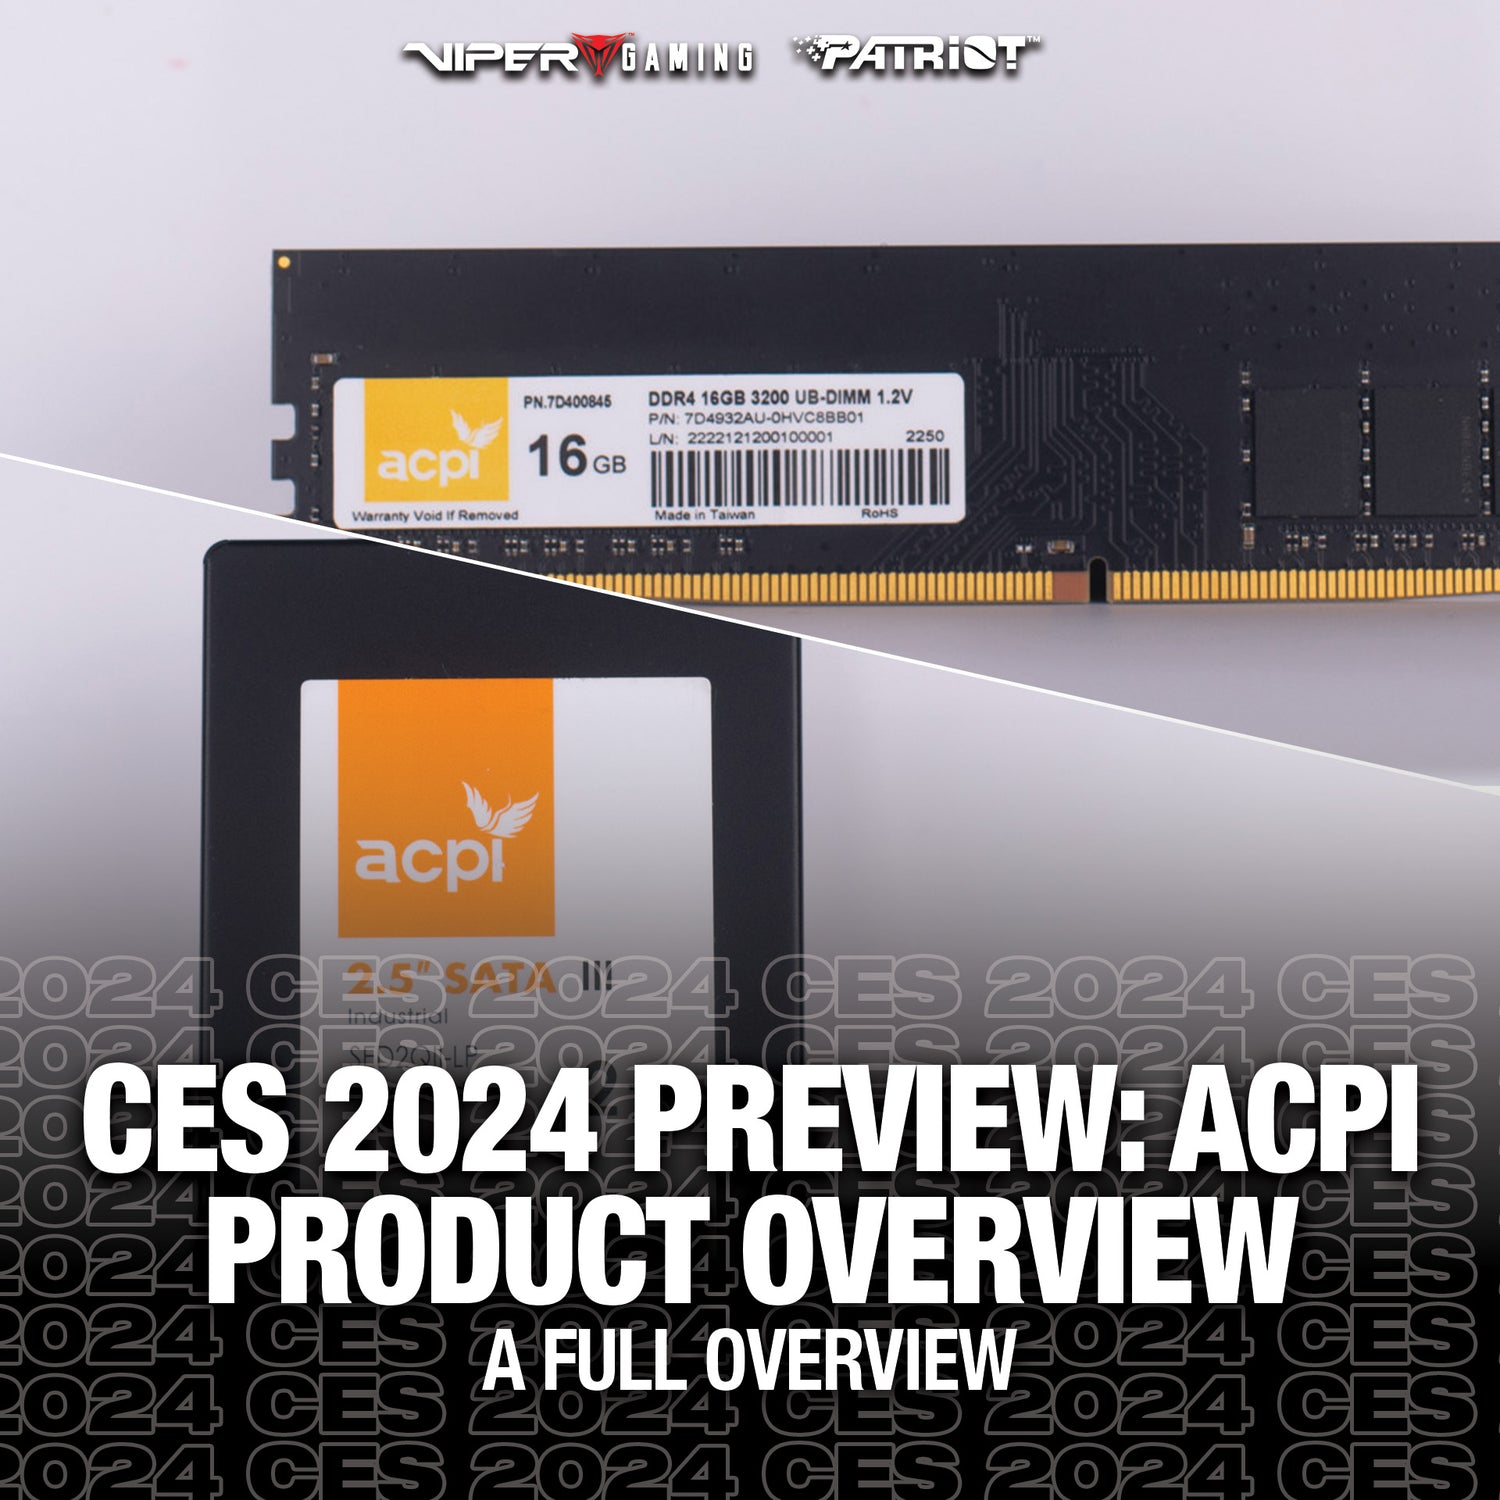 CES 2024 Preview: ACPI Product Overview